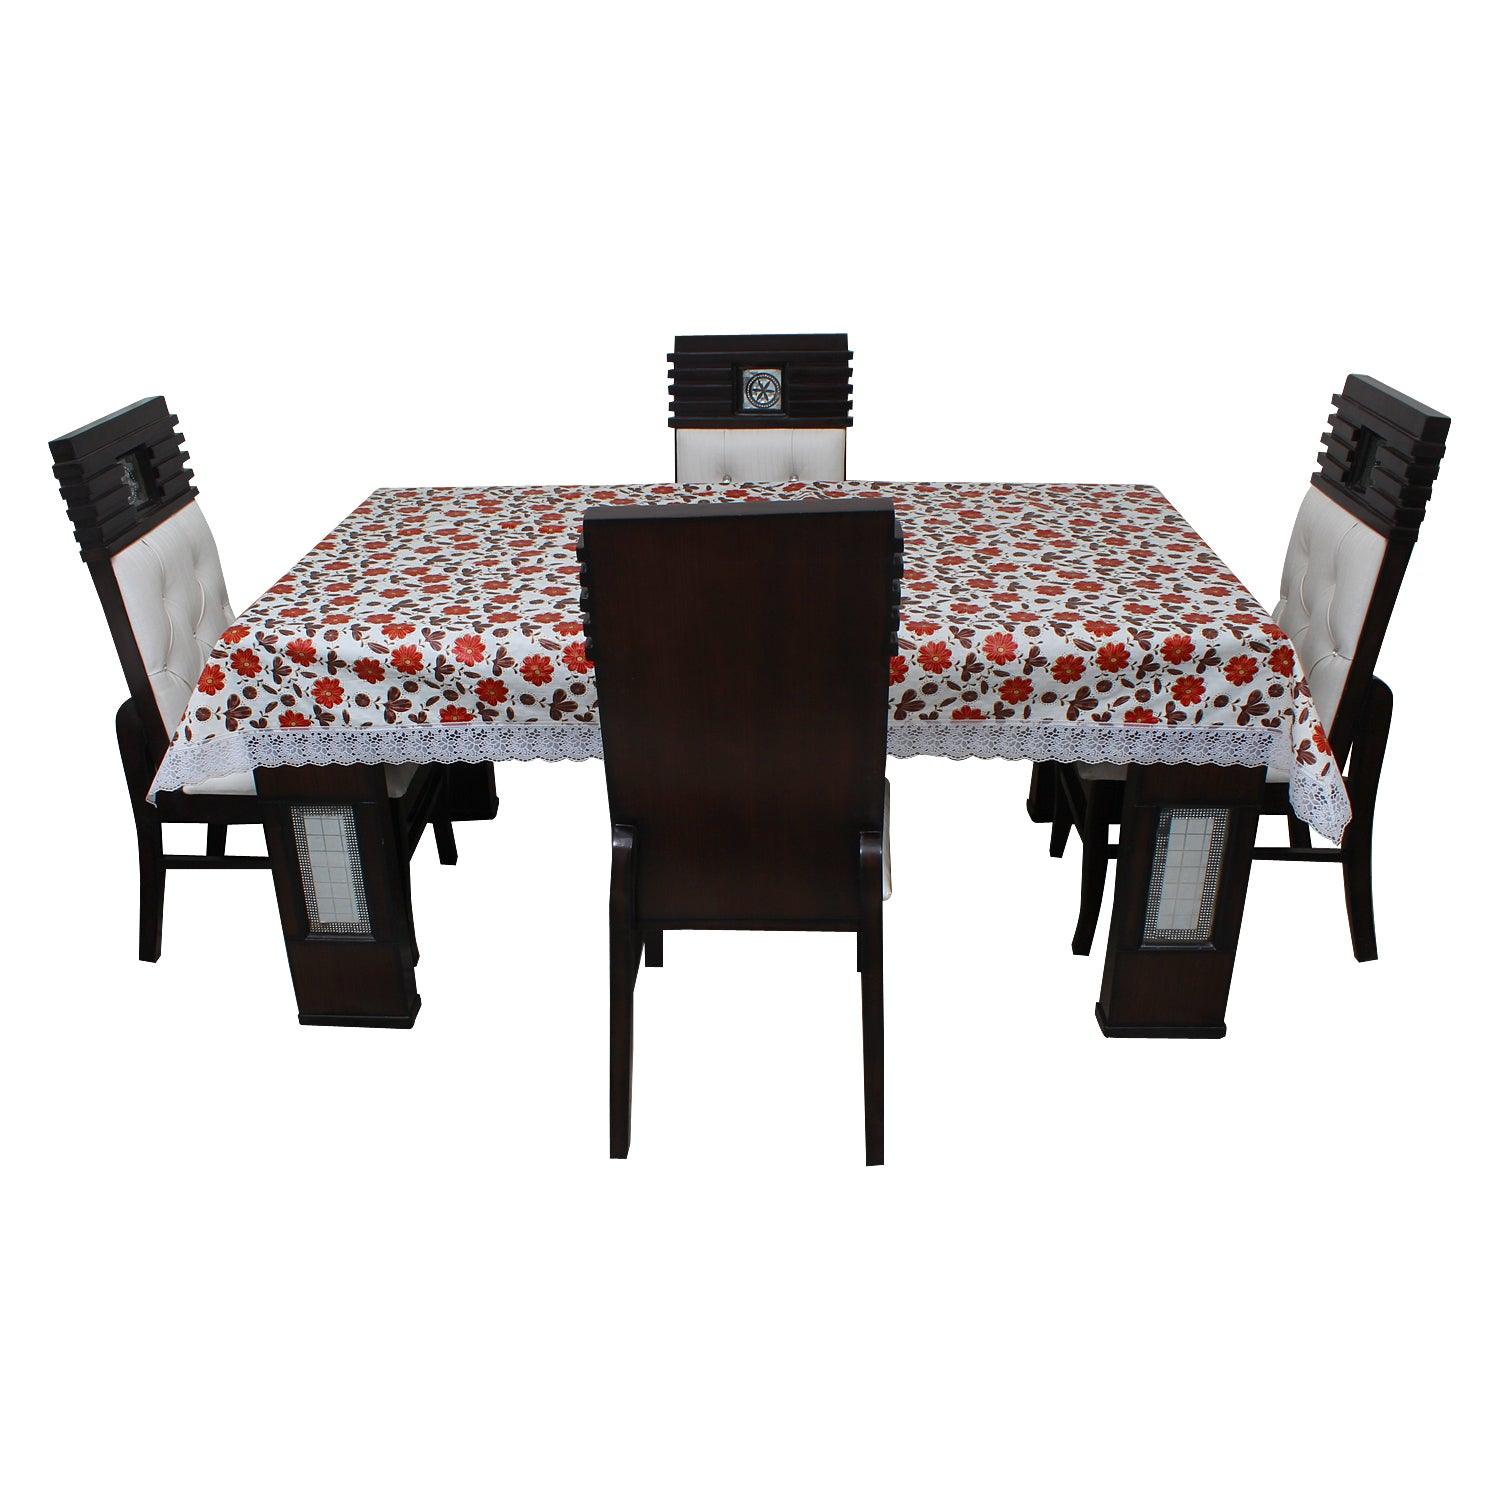 Waterproof and Dustproof Dining Table Cover, SA20 - Dream Care Furnishings Private Limited